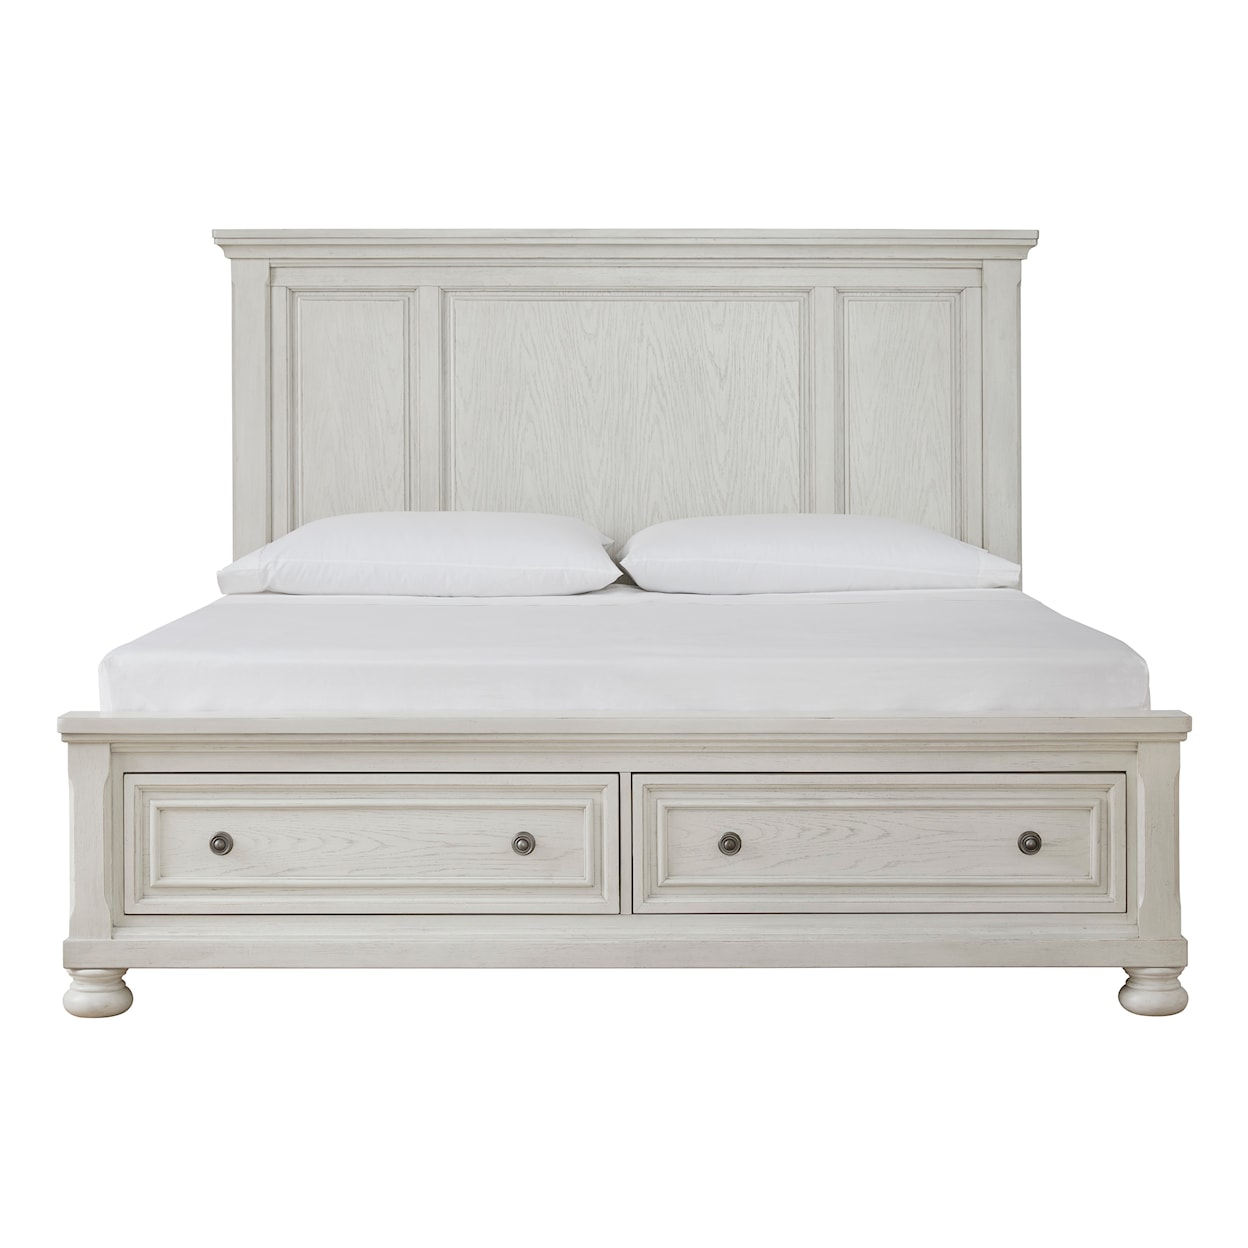 Benchcraft Robbinsdale Queen Panel Bed with Storage